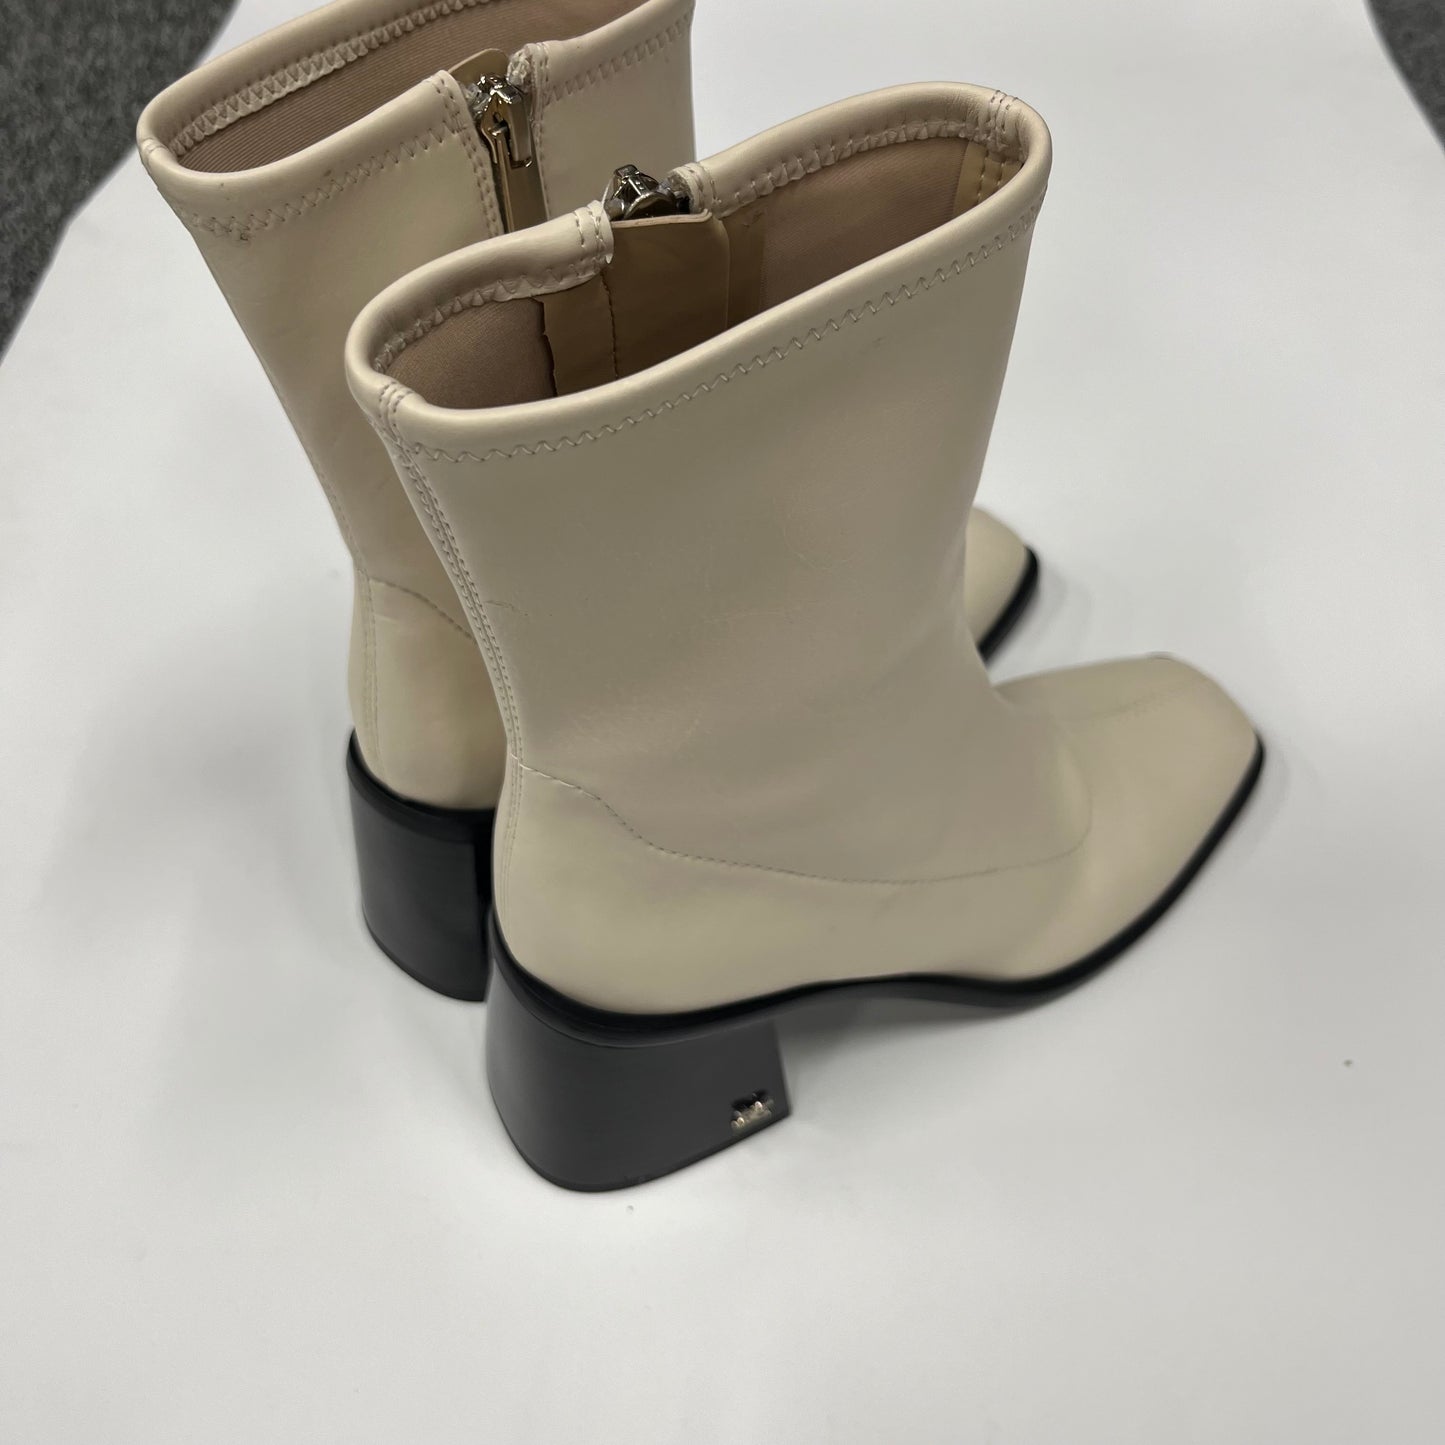 Boots Ankle Heels By Sam Edelman  Size: 6.5